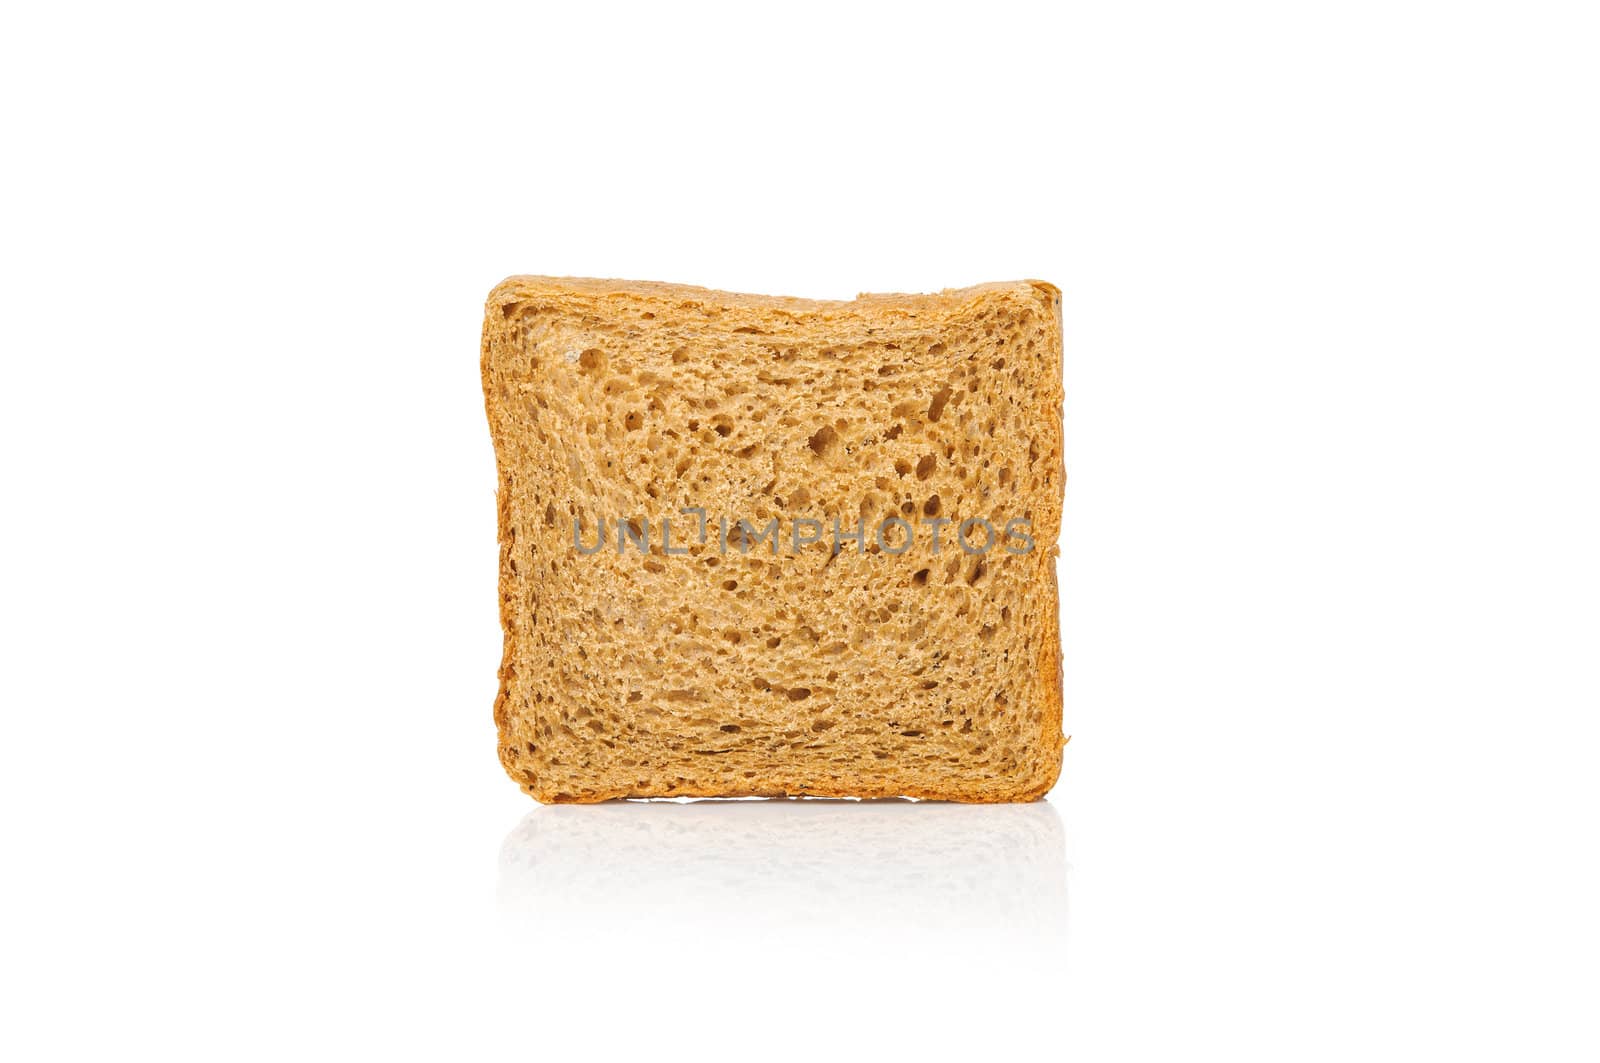 one square bread sliced isolated on white